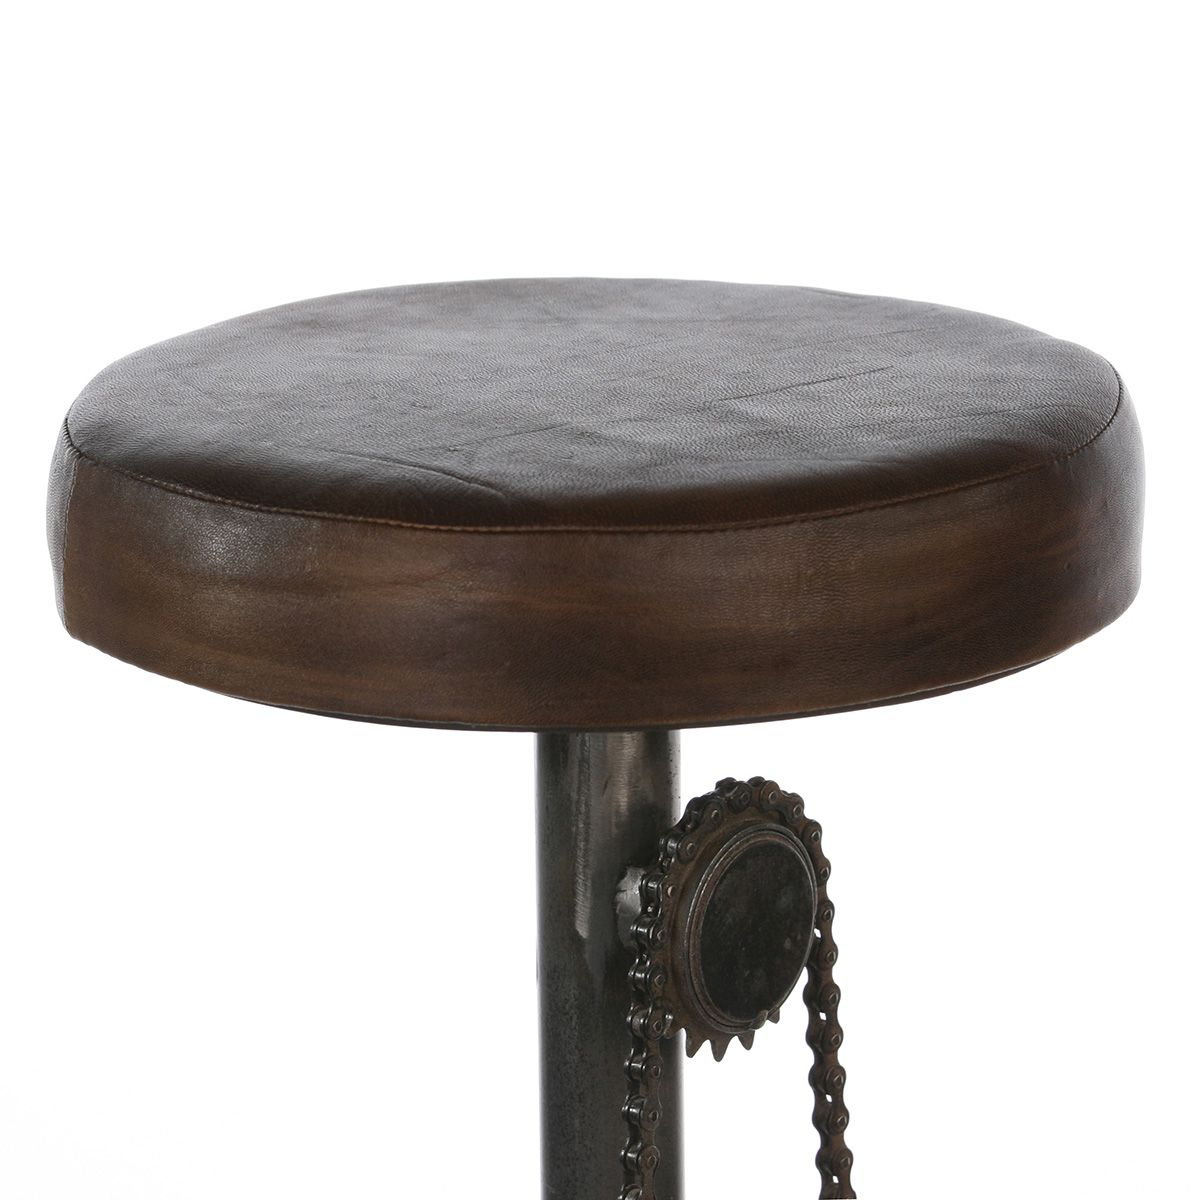 Recycled Wheel and Metal Parts Stool